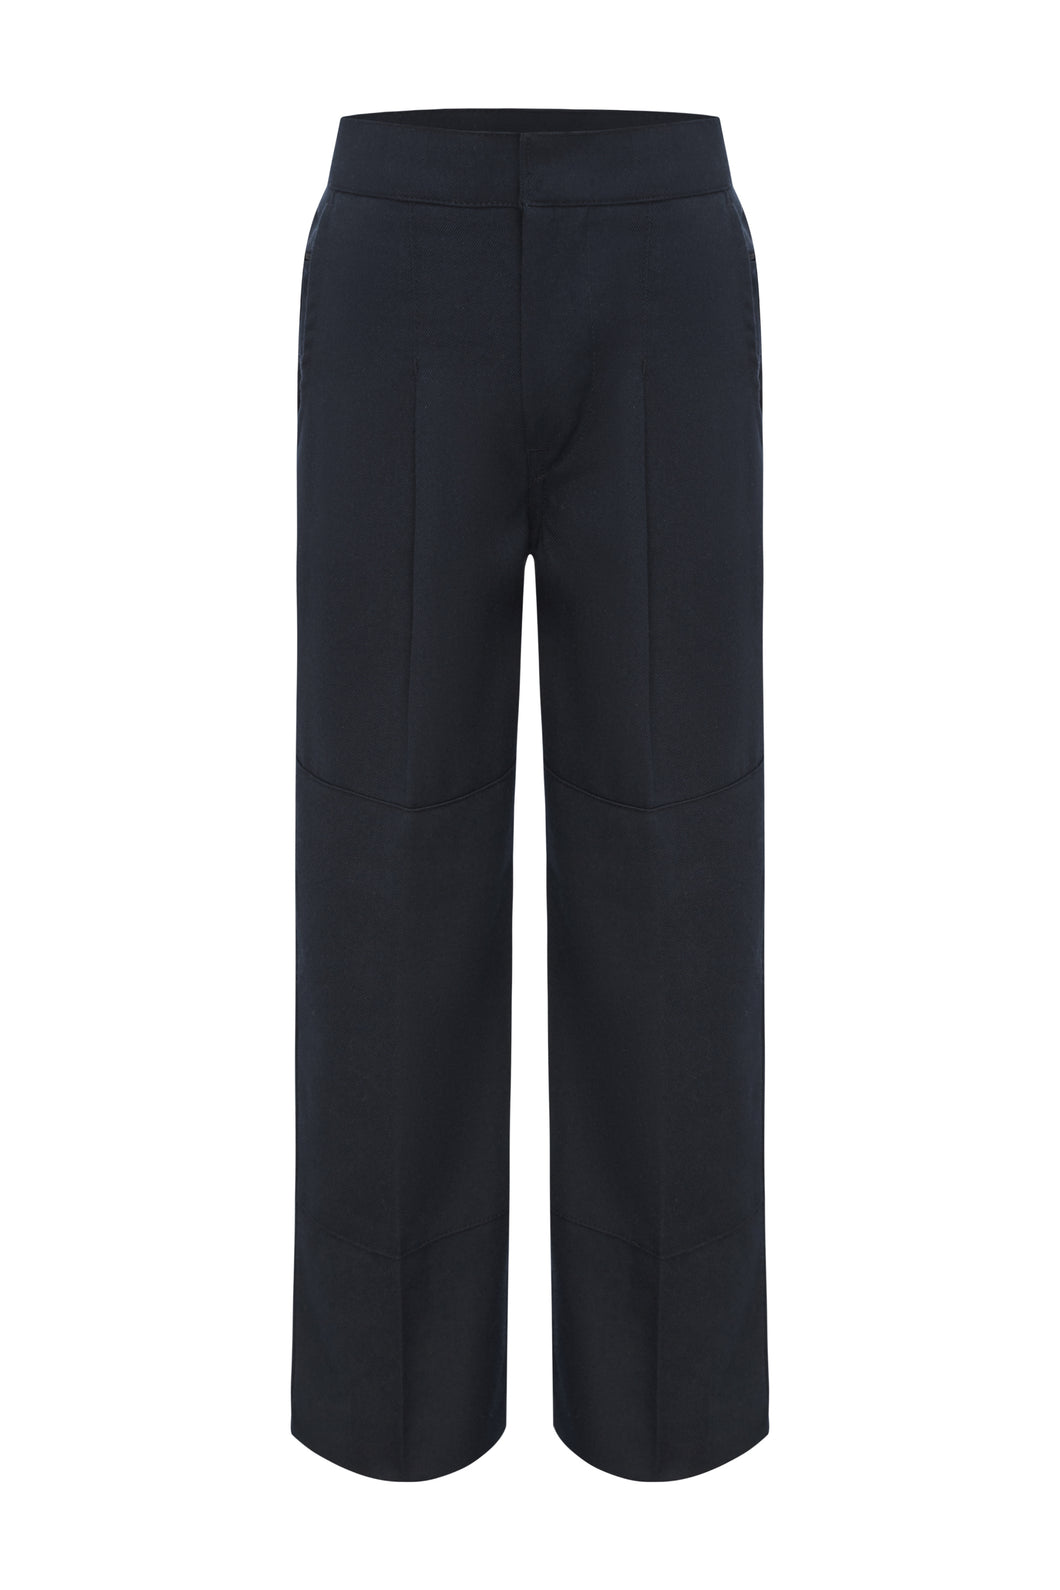 Primary Navy Long Pants (slimmer fit/double knee )